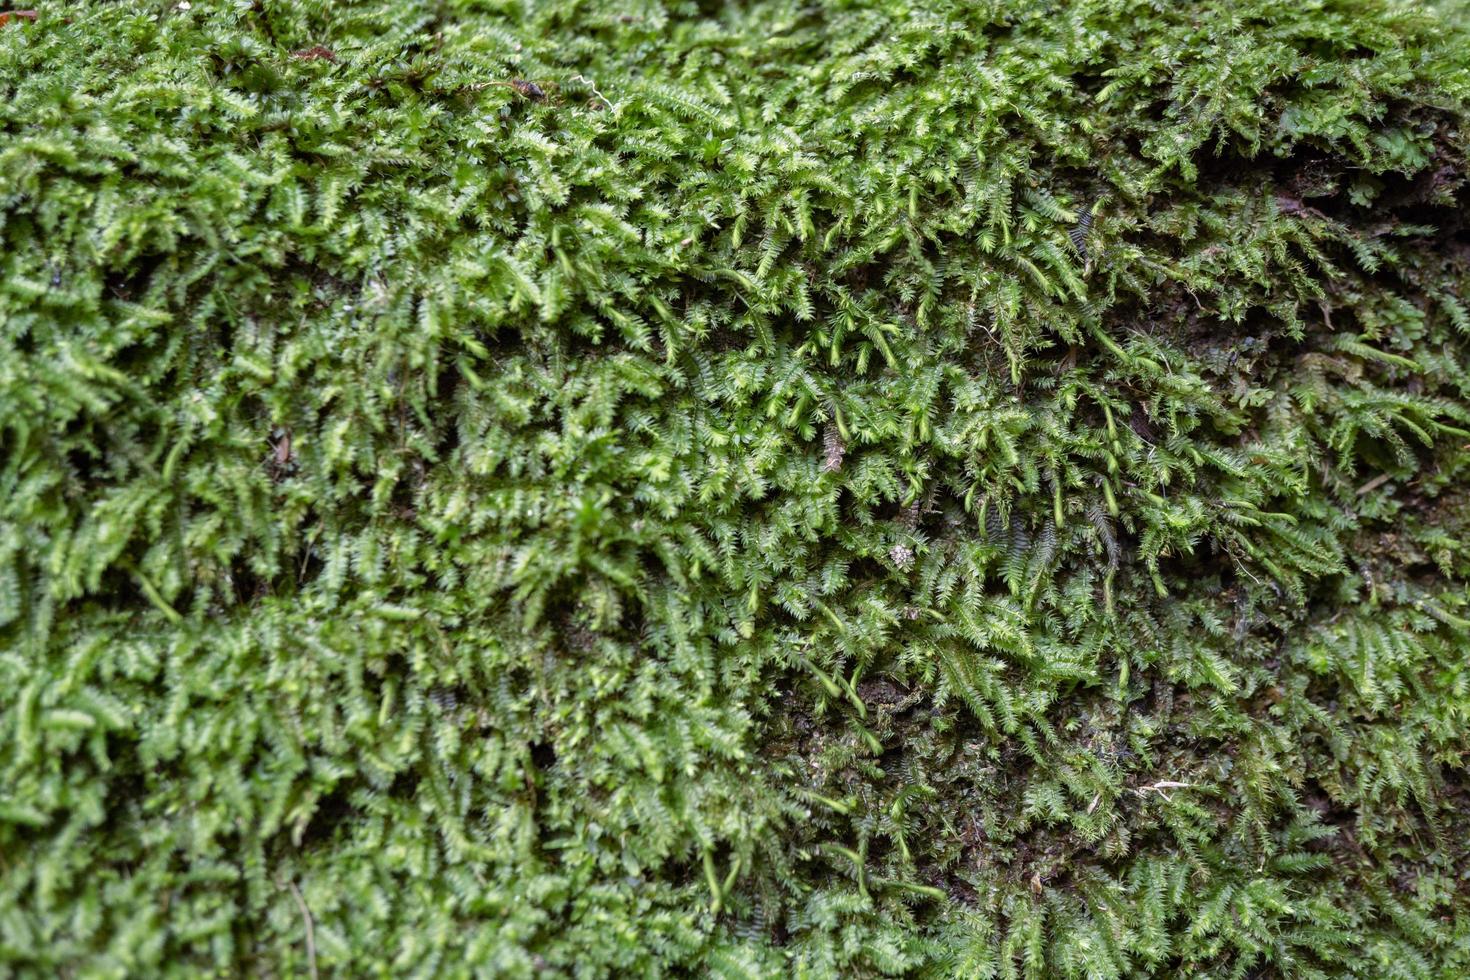 The moss surface on the tree branch when rainy season. The photo is suitable to use for adventure content media, nature poster and forest background.